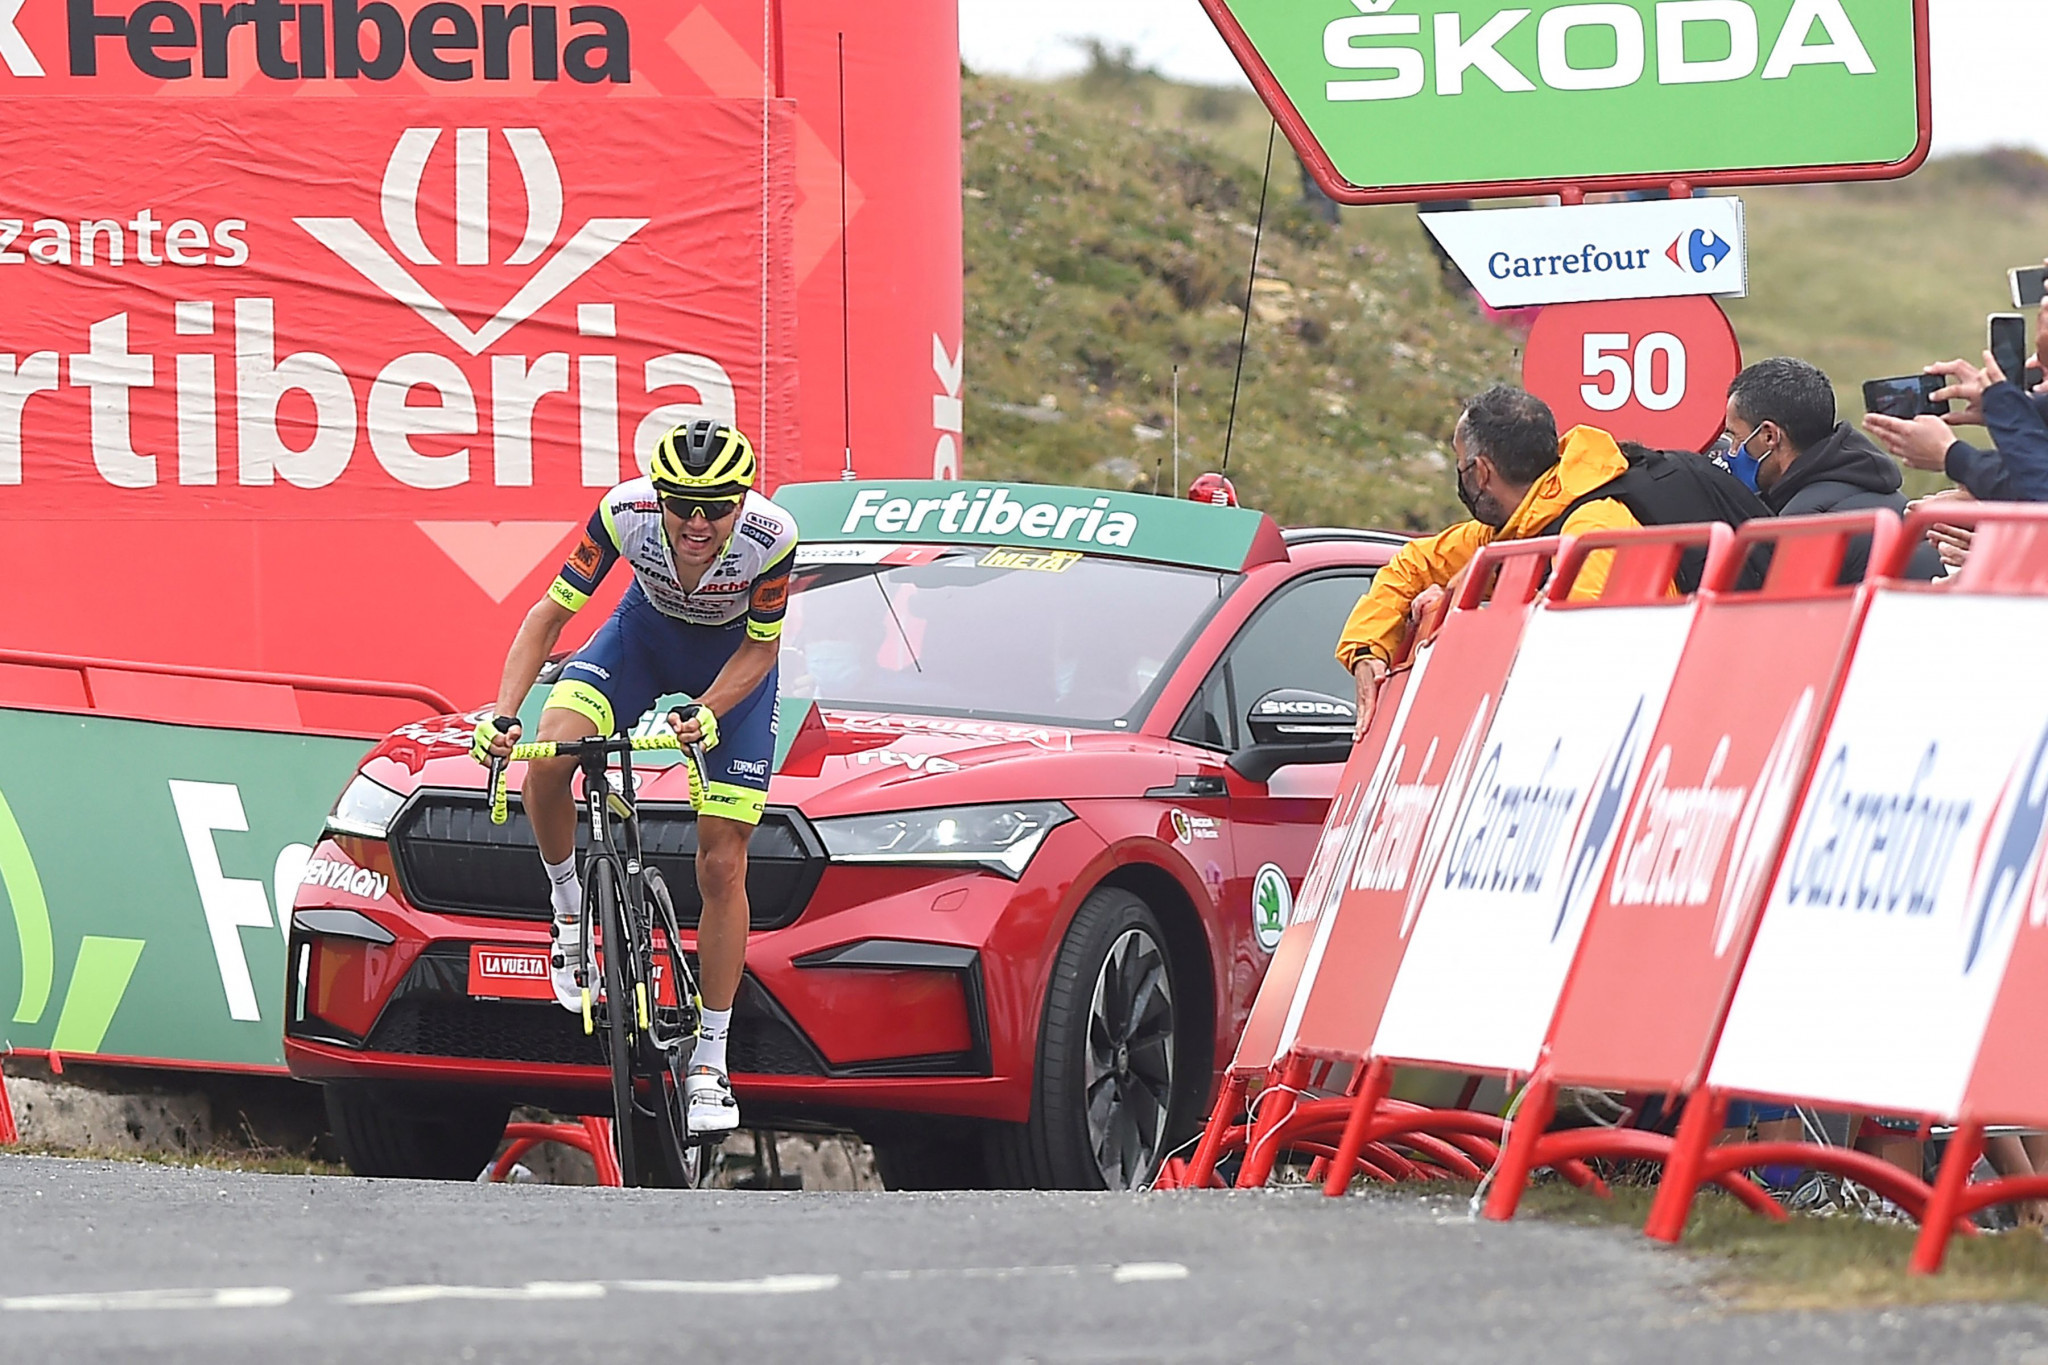 Late attack helps Taaramäe clinch summit victory and take Vuelta a España lead